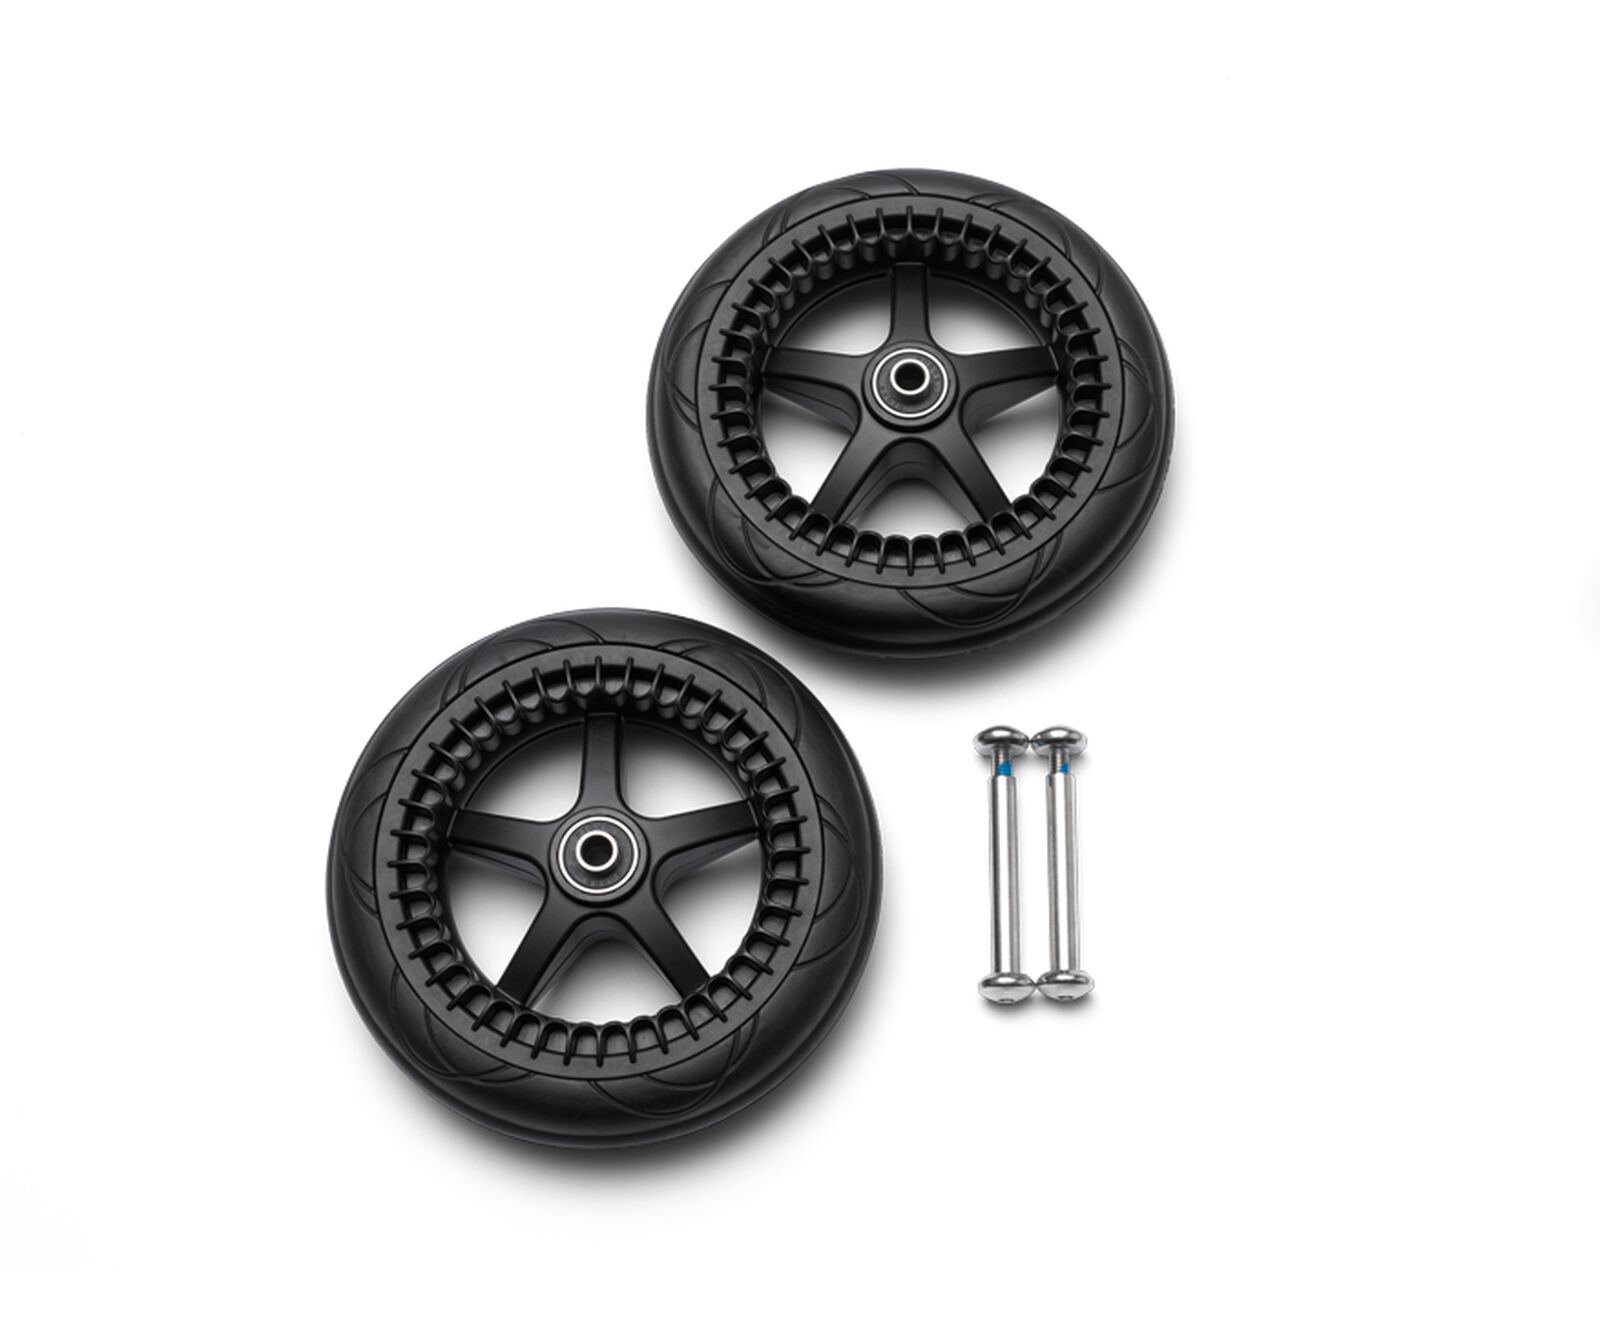 Bugaboo Bee 5 rear wheels replacement set - View 1